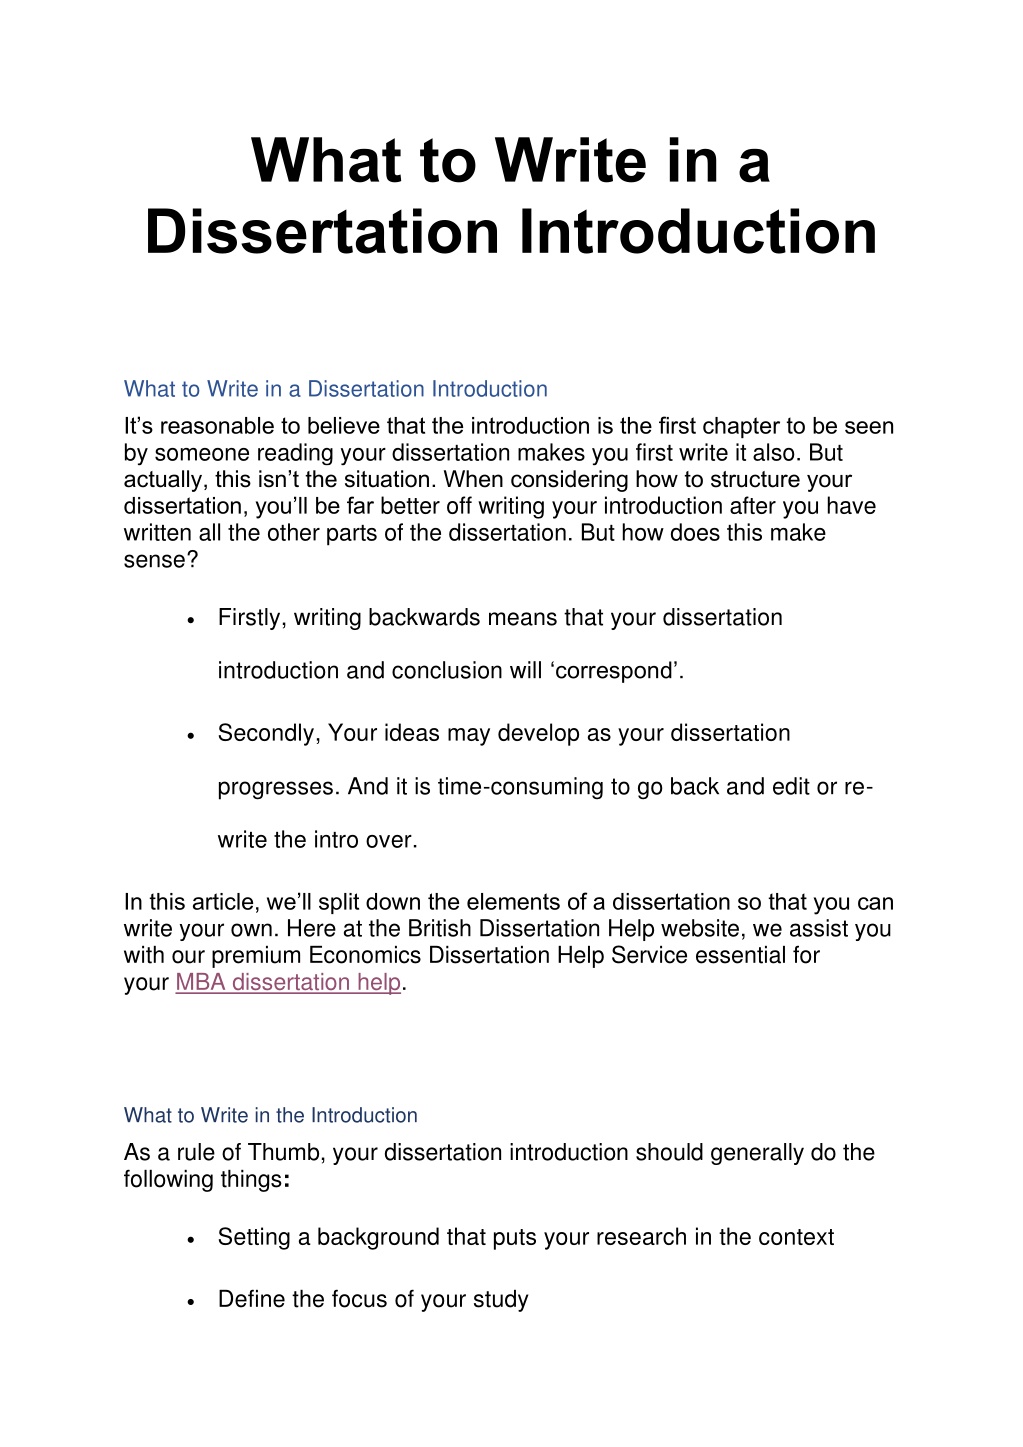 writing an introduction to a dissertation